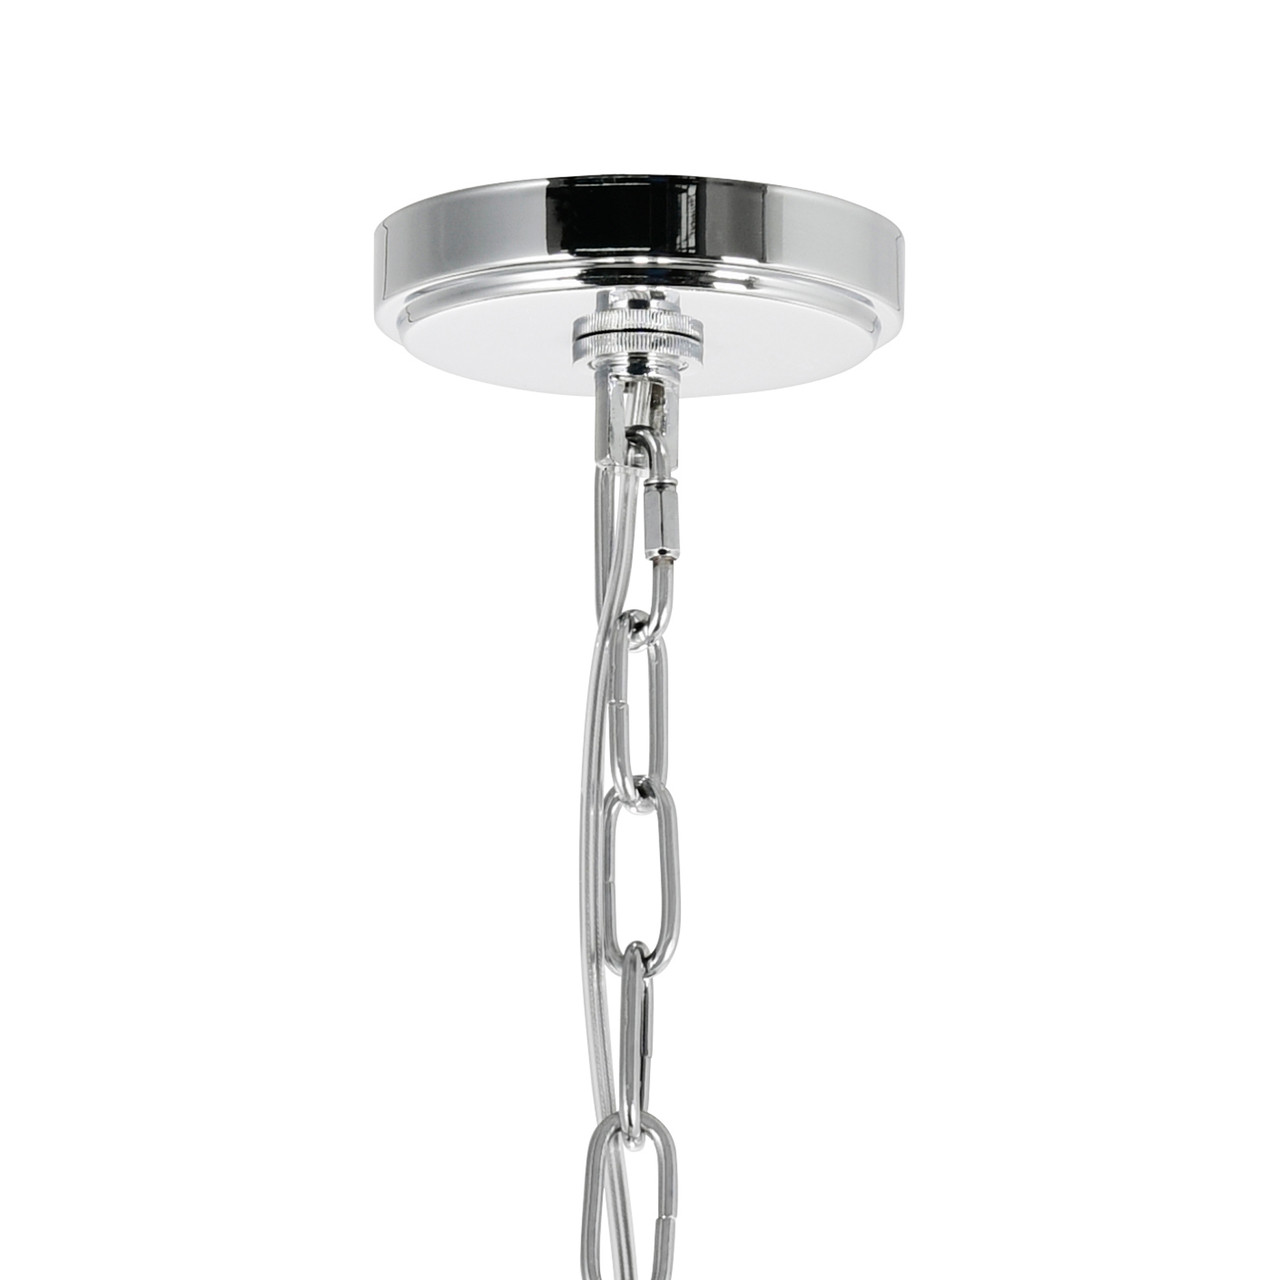 CWI LIGHTING 8003P30C 17 Light Down Chandelier with Chrome finish